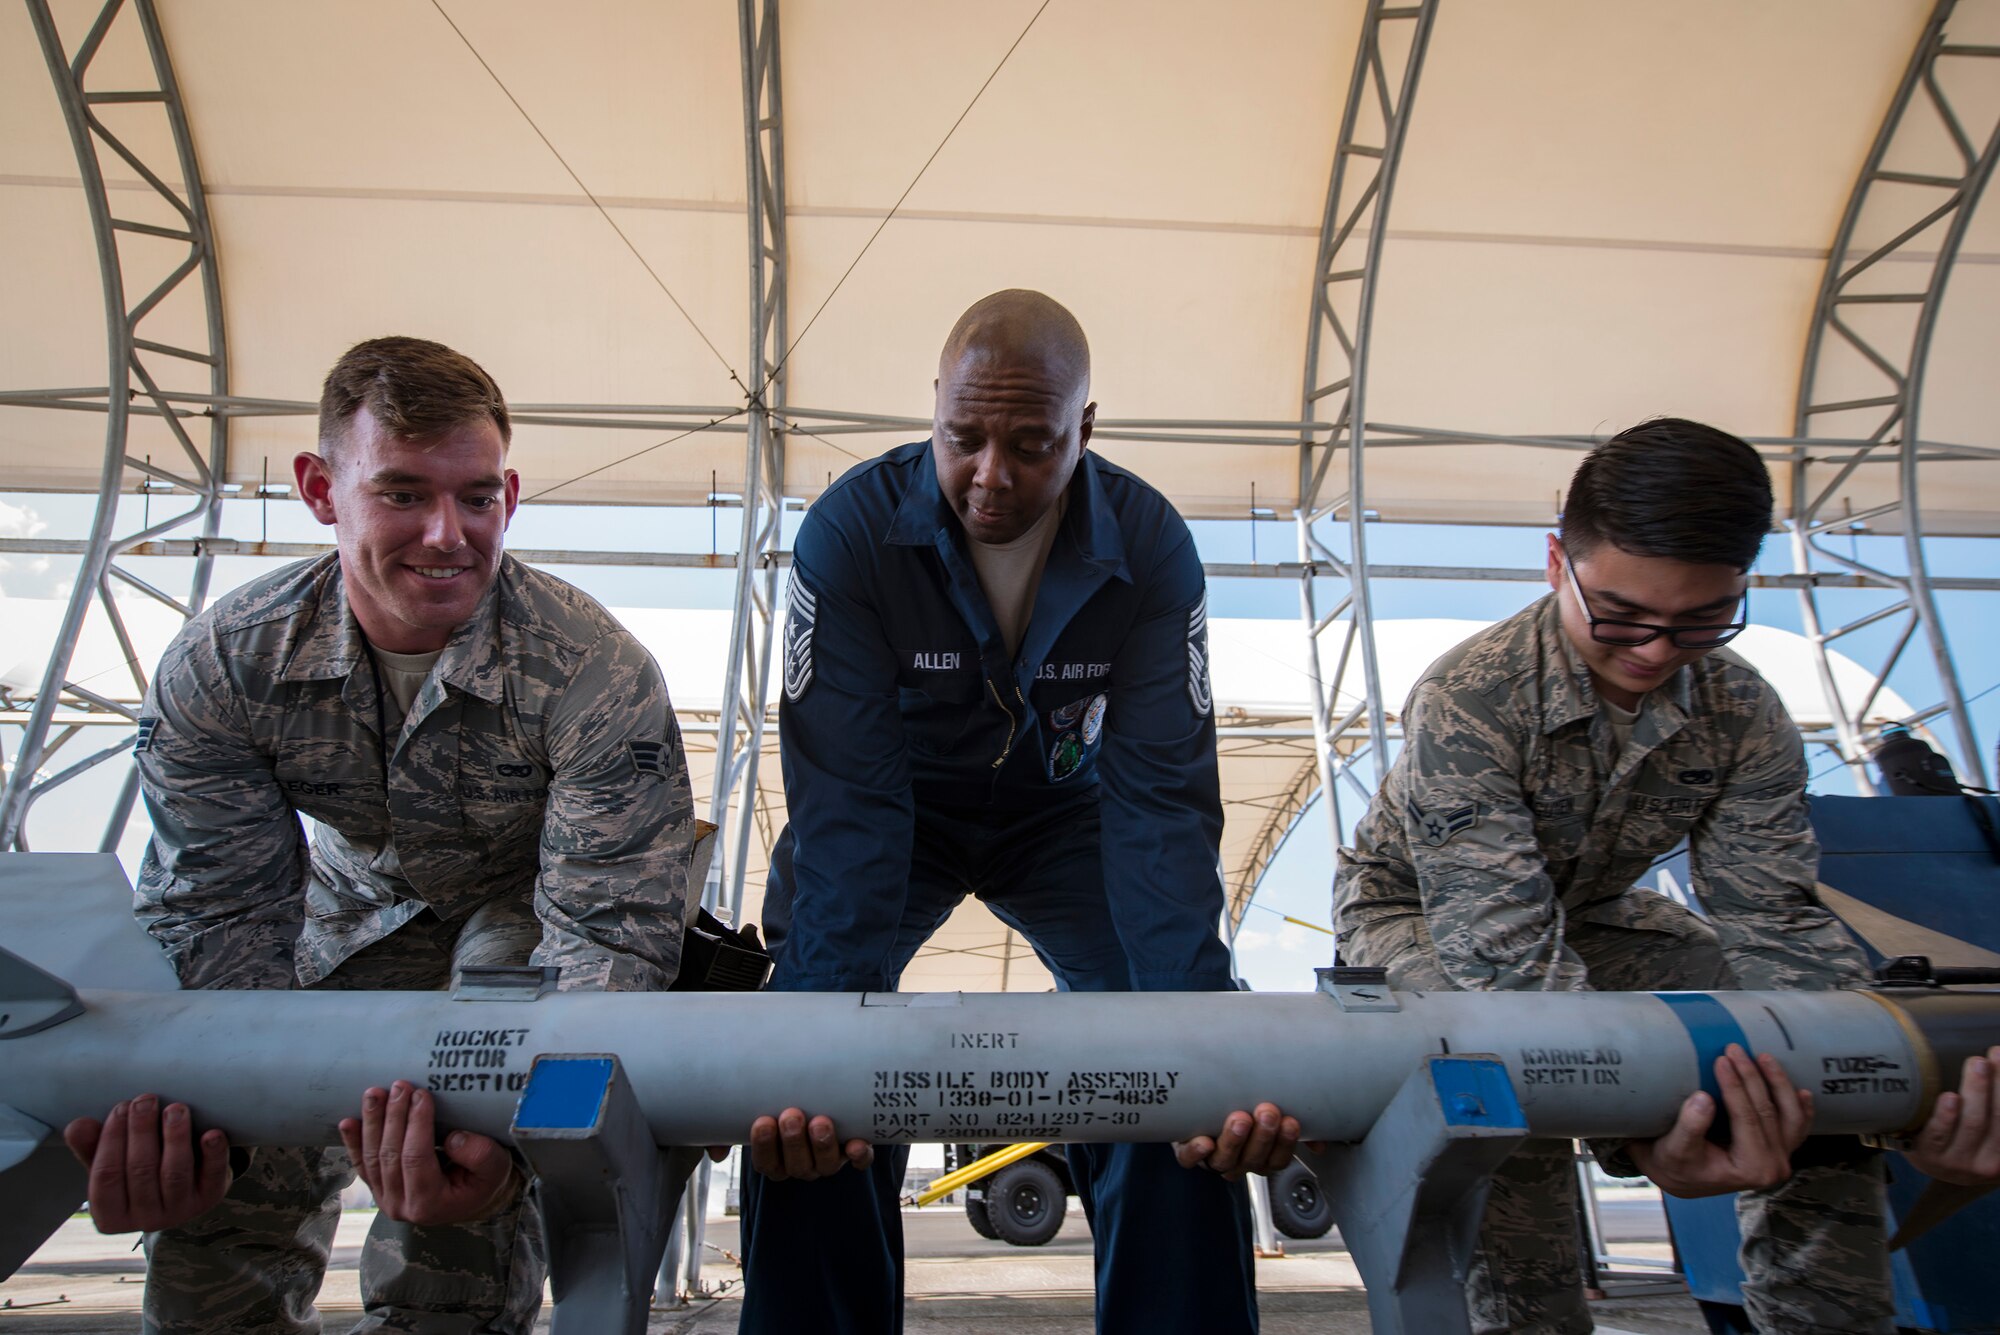 Chief Master Sgt. James Allen, 23d Wing command chief, center, and Airmen from the 23d Aircraft Maintenance Squadron (AMXS), lift an inert AIM-9 air-to-air missile during an immersion tour, July 10, 2018, at Moody Air Force Base, Ga. Allen toured the 23d AMXS to build rapport and experience the day to day operations of maintenance Airmen. Throughout his visit, Allen was able to speak with Airmen and hear their opinions and ideas behind the continued success of the AMXS. (U.S. Air Force photo by Airman 1st Class Eugene Oliver)